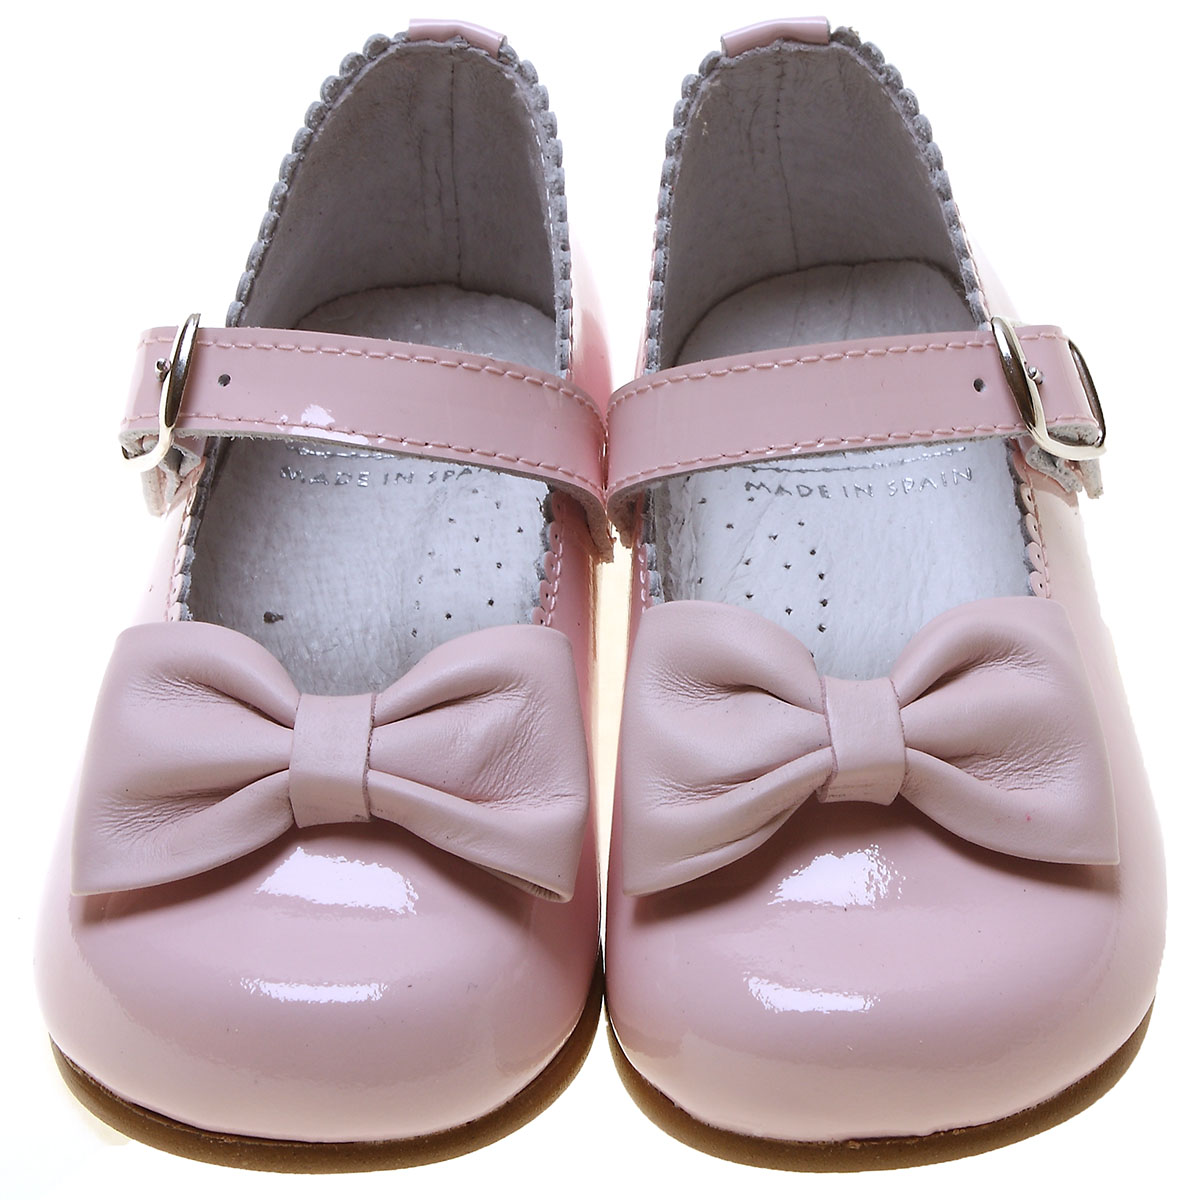 Girls Pink Mary Jane Shoes Scallop Bow Patent Cachet Kids